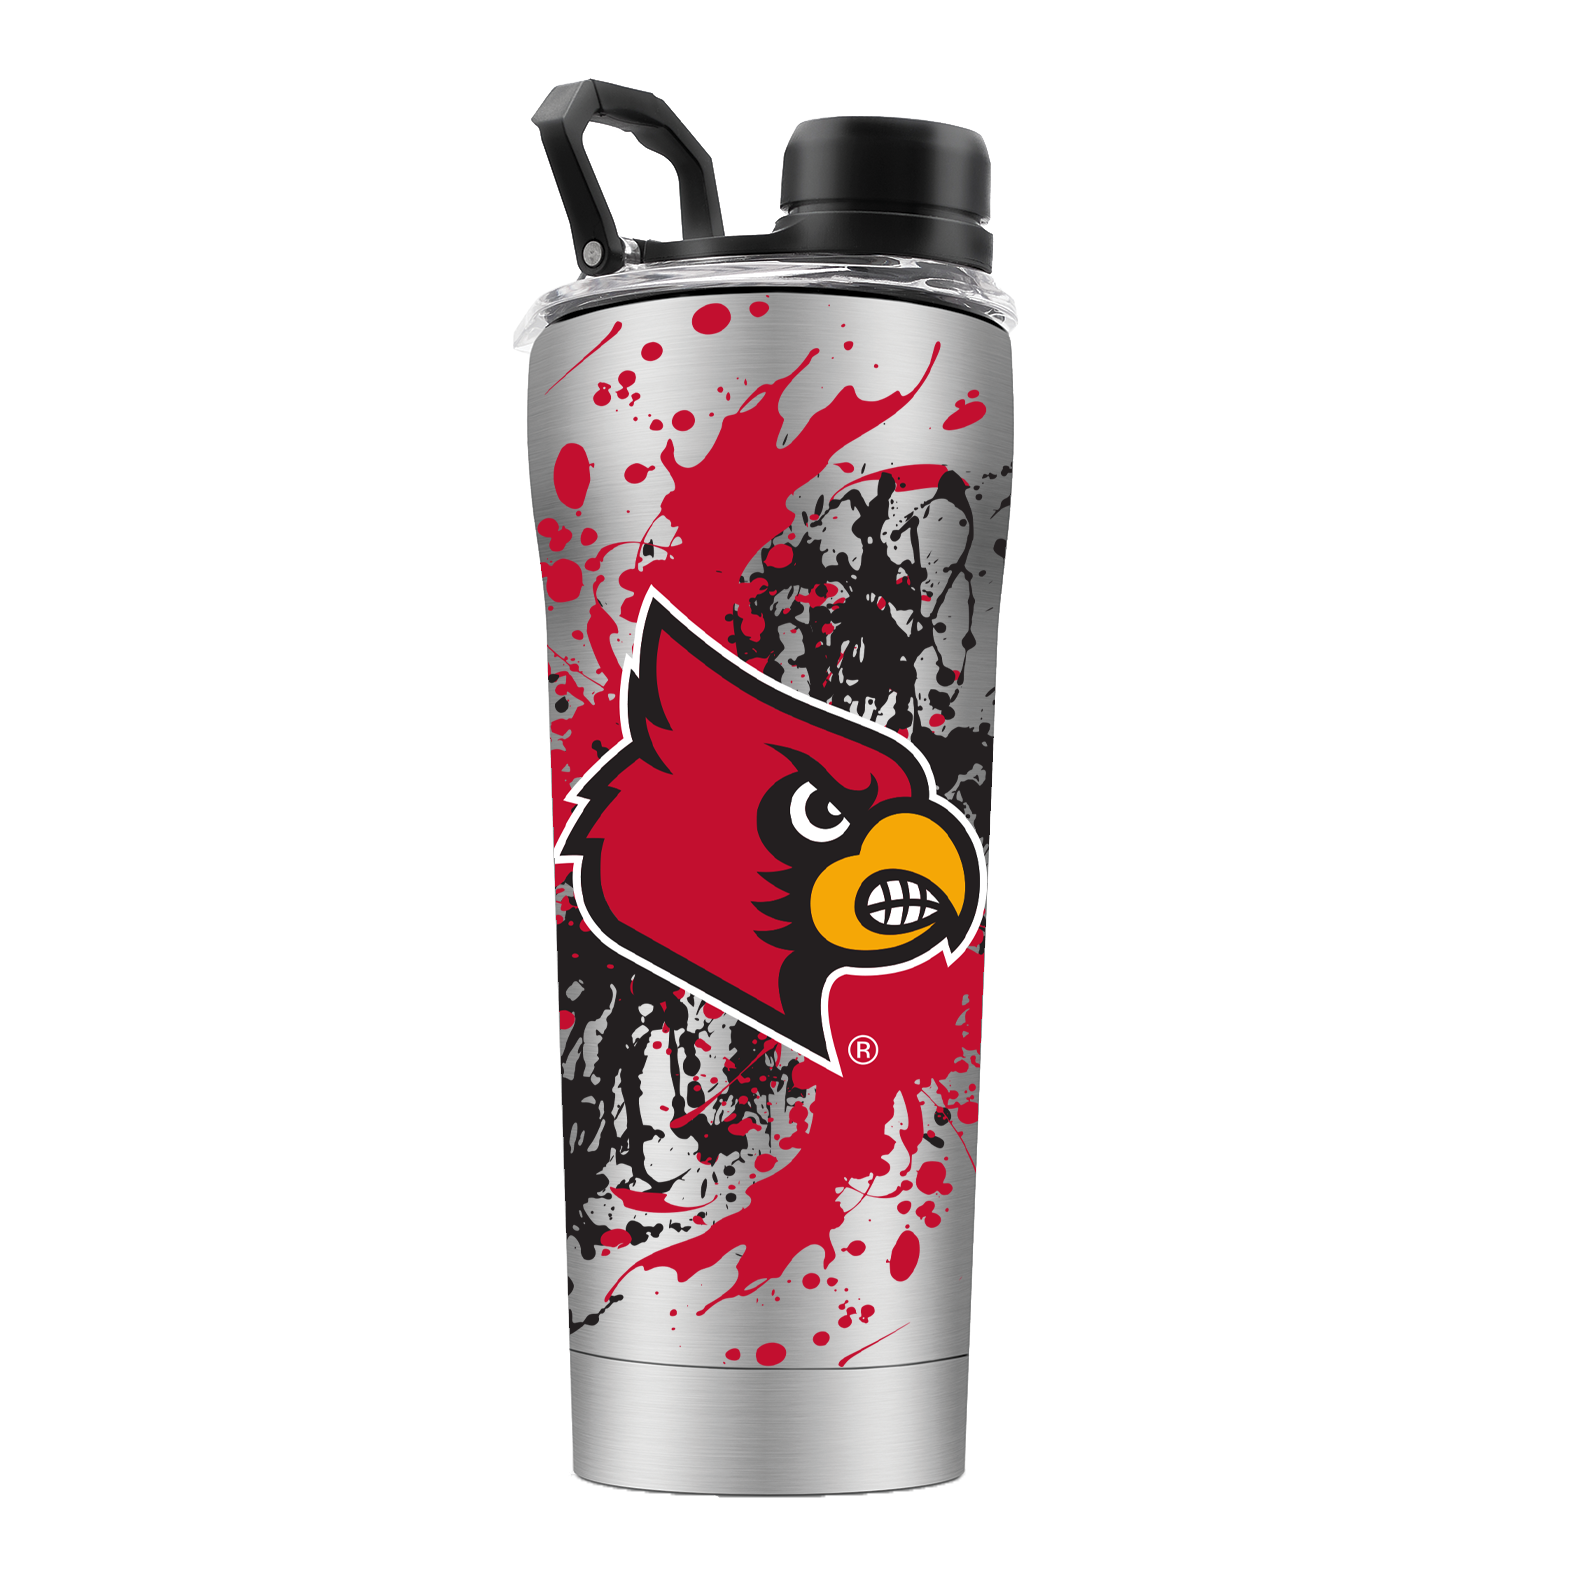 Louisville Cardinals Stripes 12 oz Stainless Steel Tumbler with